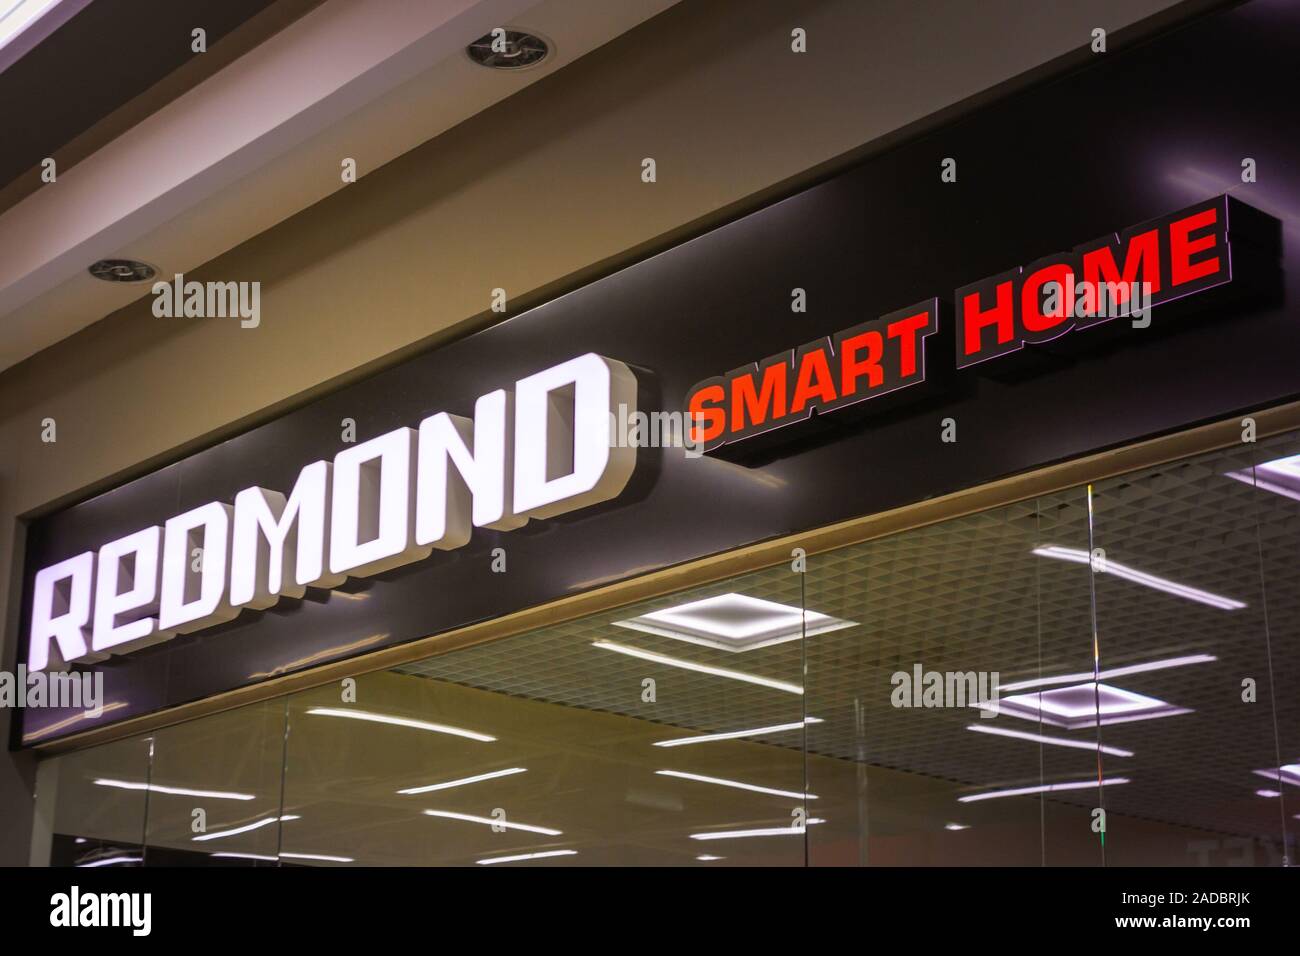 Tyumen, Russia - October 15, 2019: Redmond is a Russian trademark owned by Technopoisk LLC, under which contract production of household appliances is Stock Photo